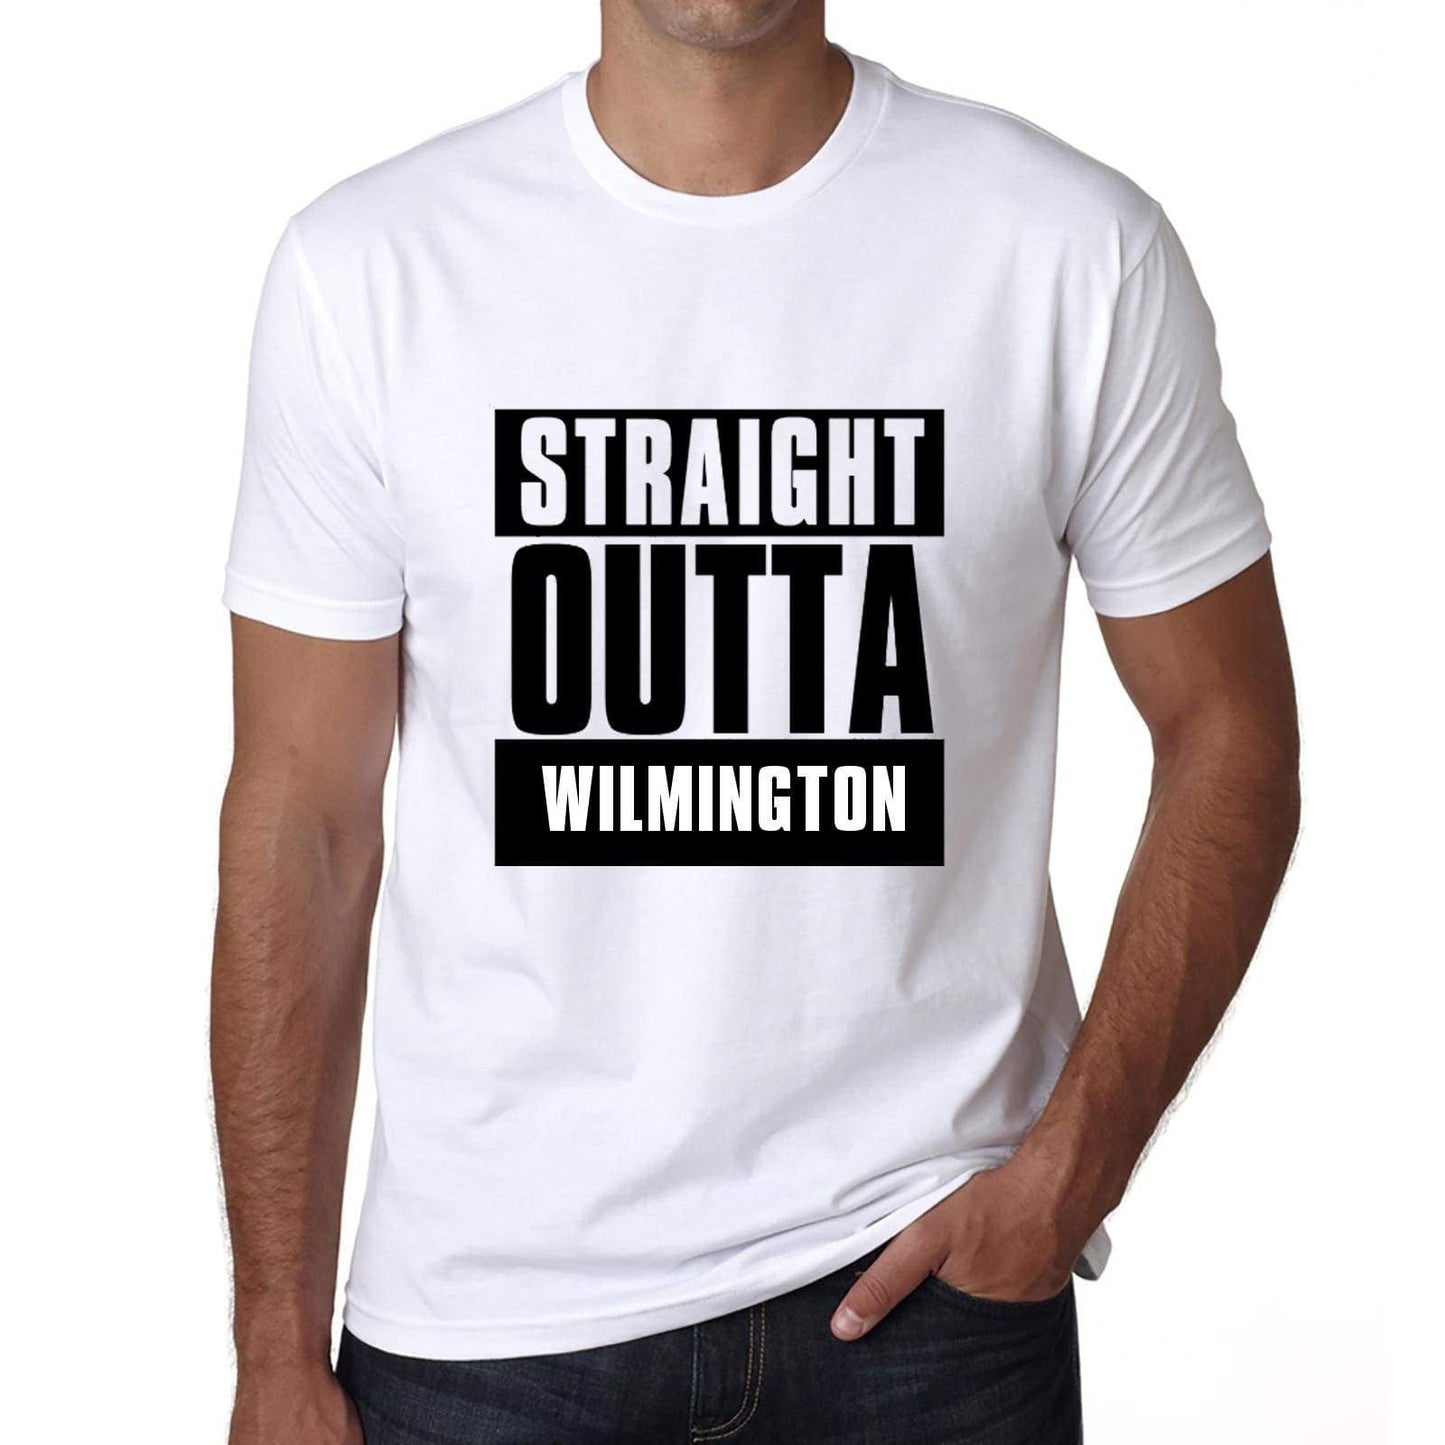 Straight Outta Wilmington Mens Short Sleeve Round Neck T-Shirt 00027 - White / S - Casual